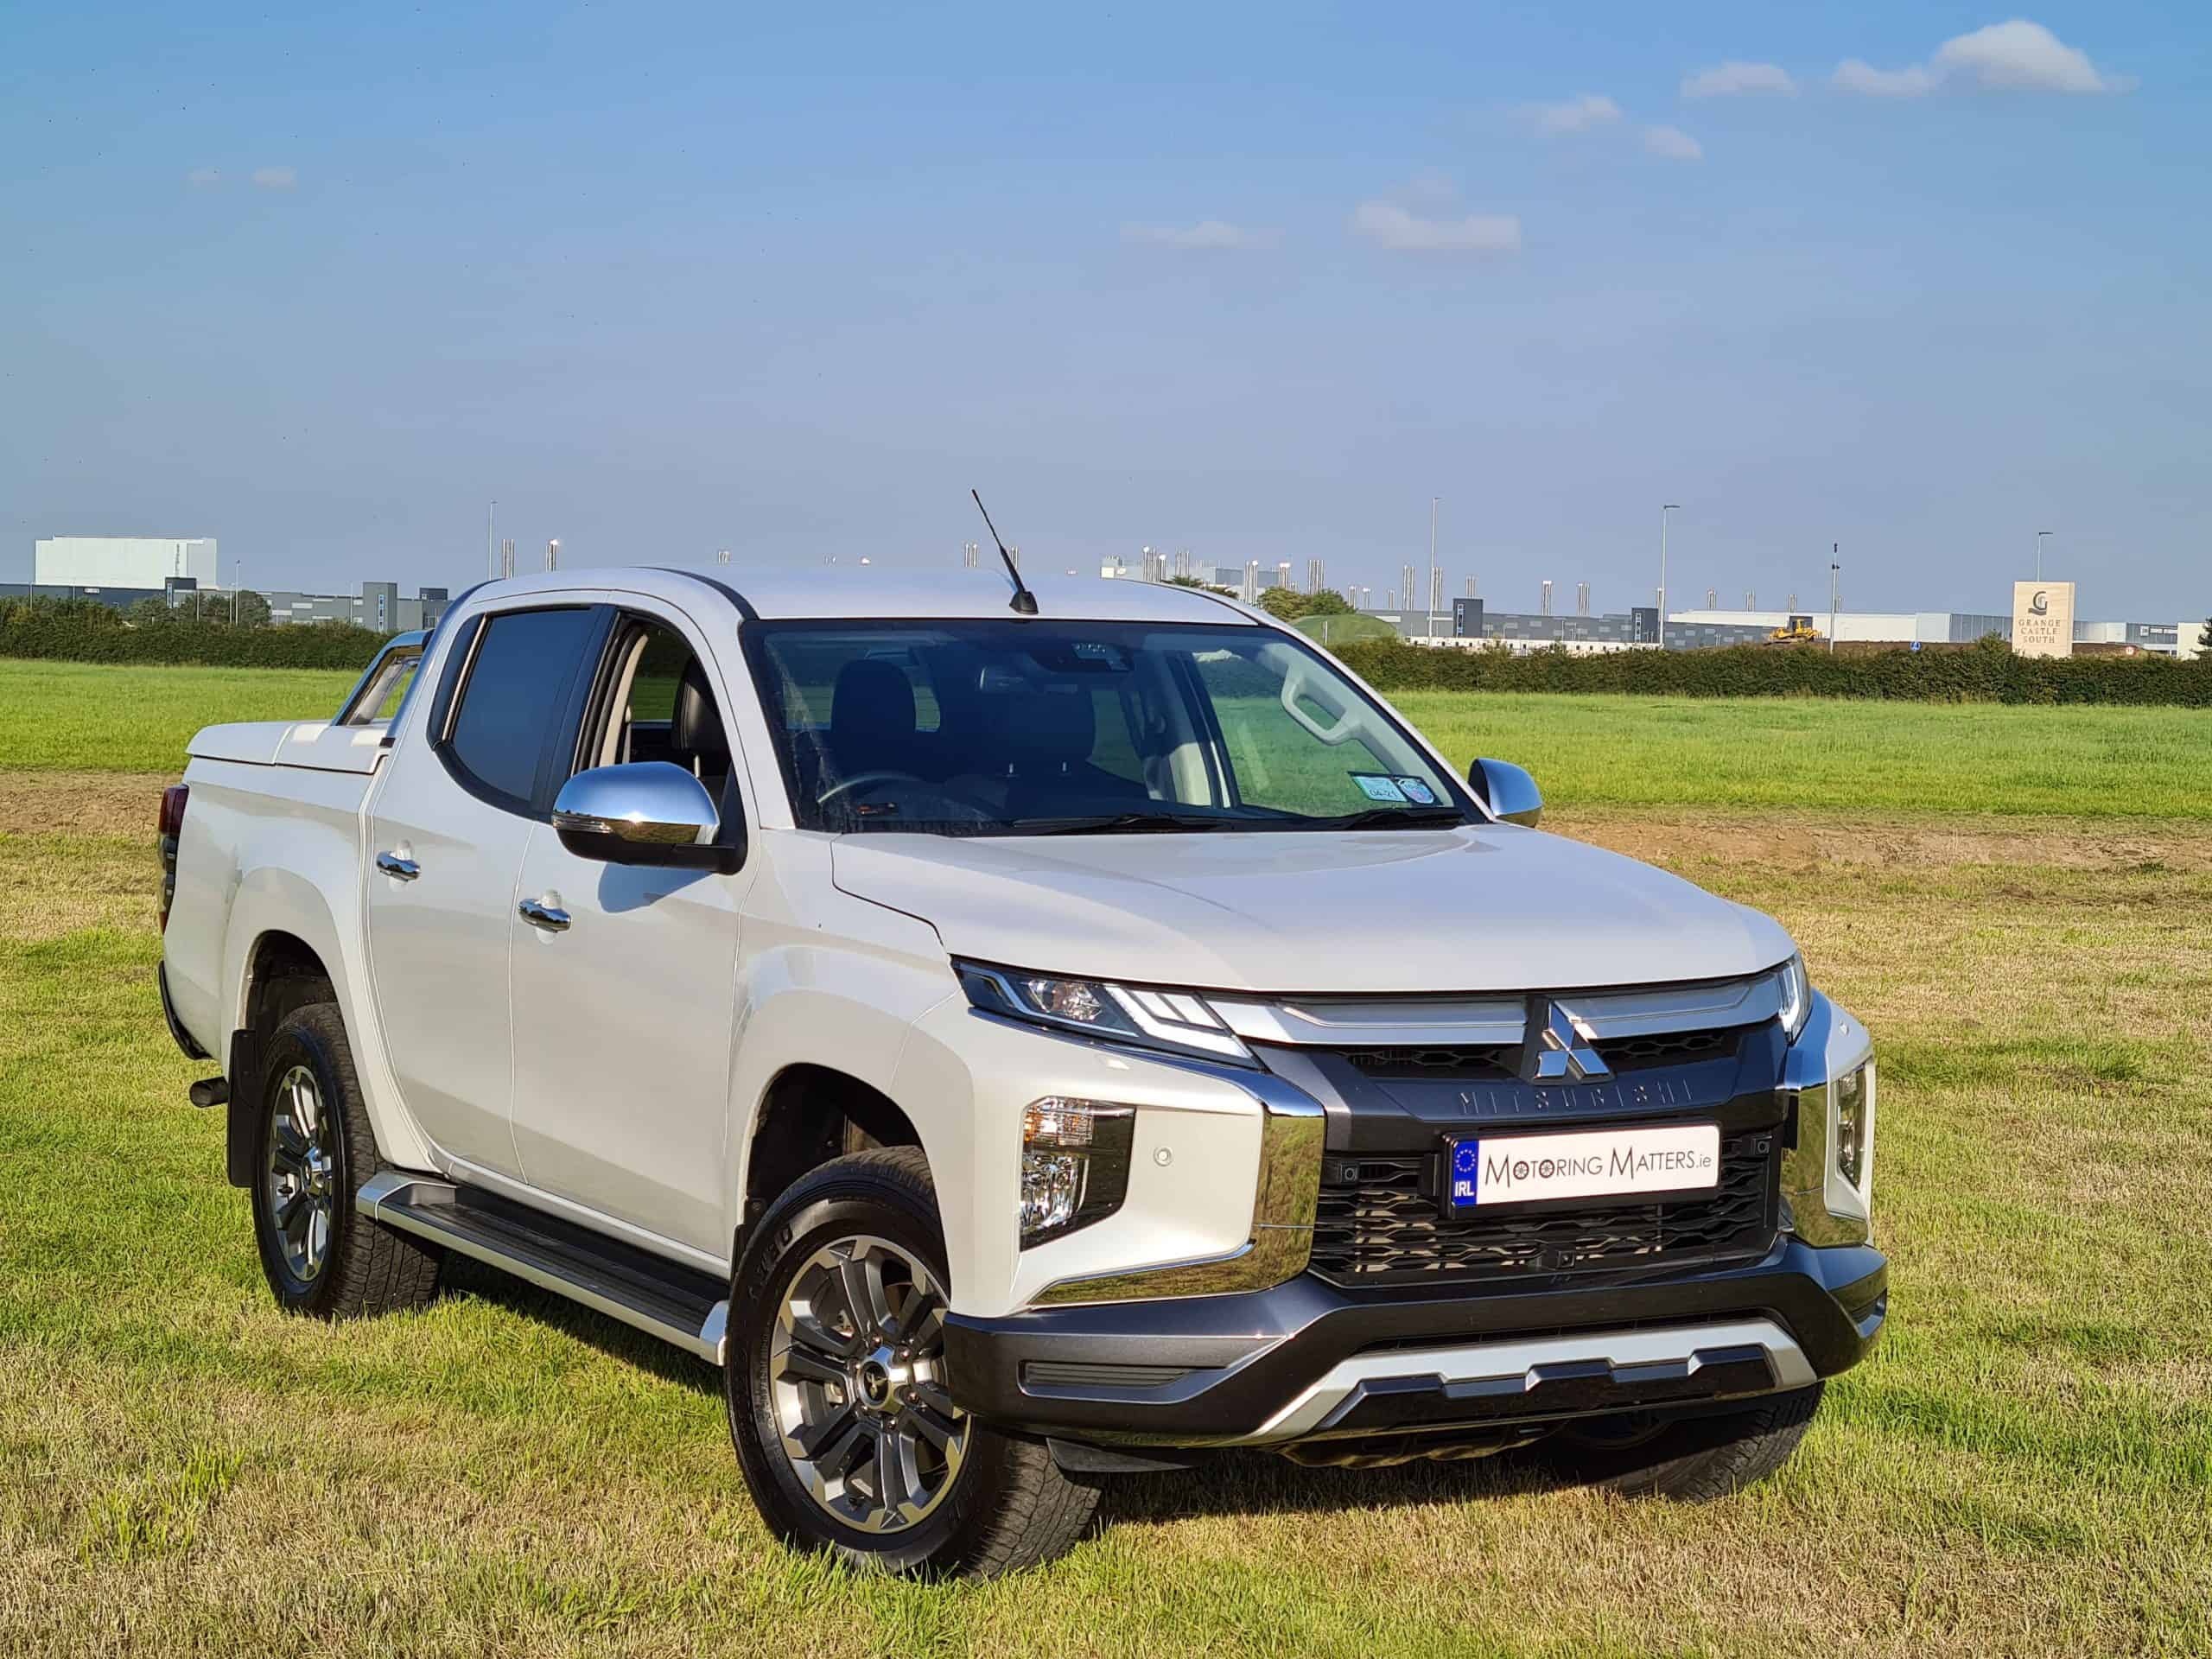 NEW MITSUBISHI L200 DOUBLECAB PICKUP IS CAPABLE & DESIRABLE